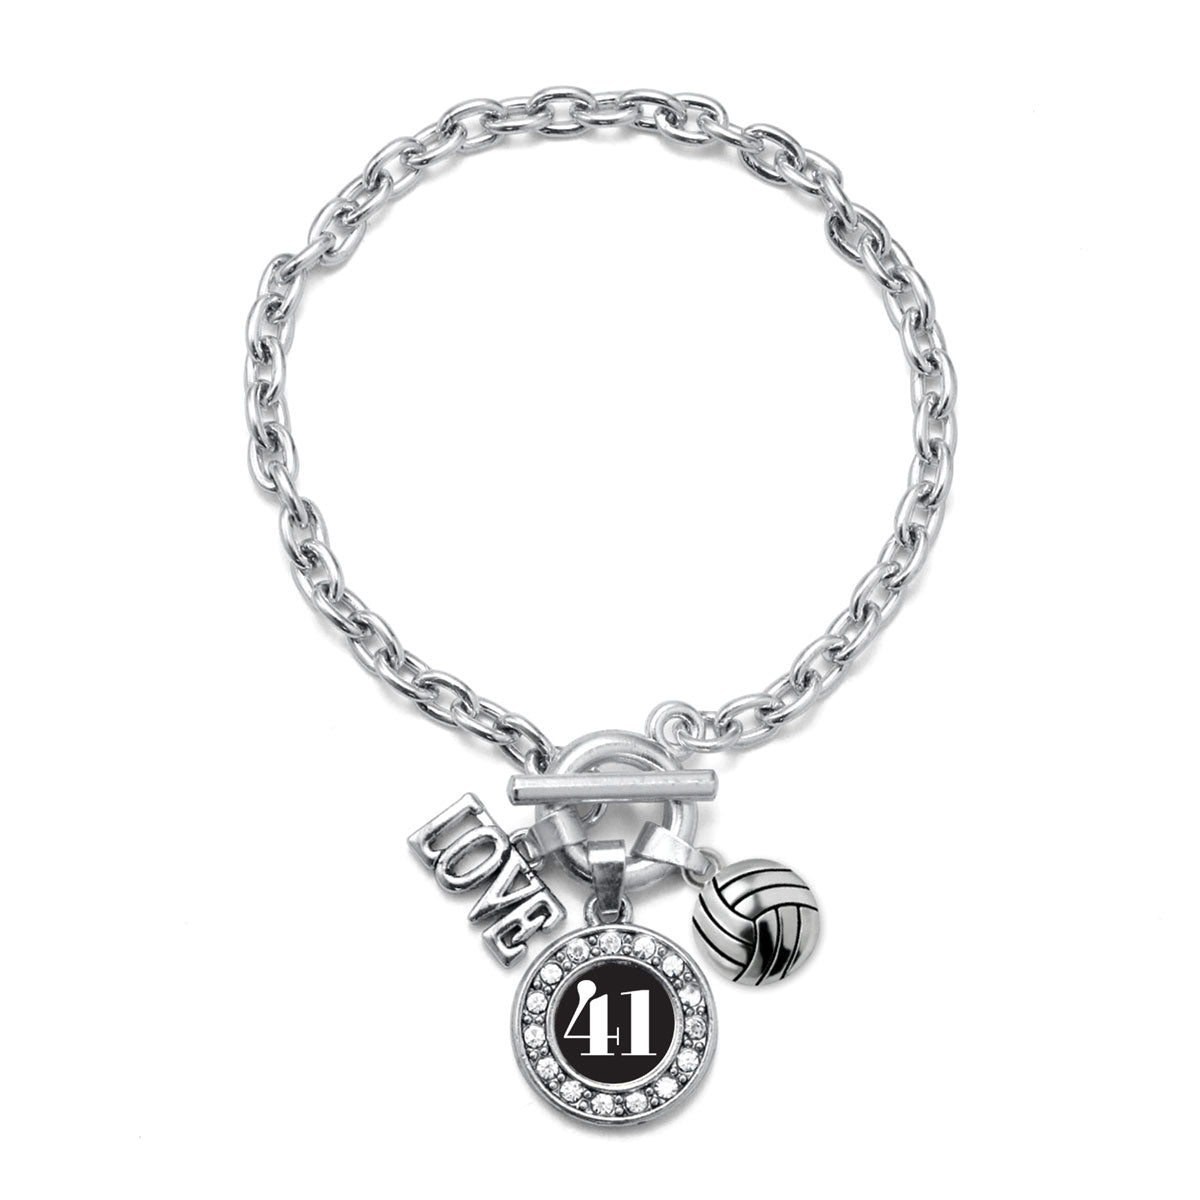 Silver Volleyball - Sports Number 41 Circle Charm Toggle Bracelet